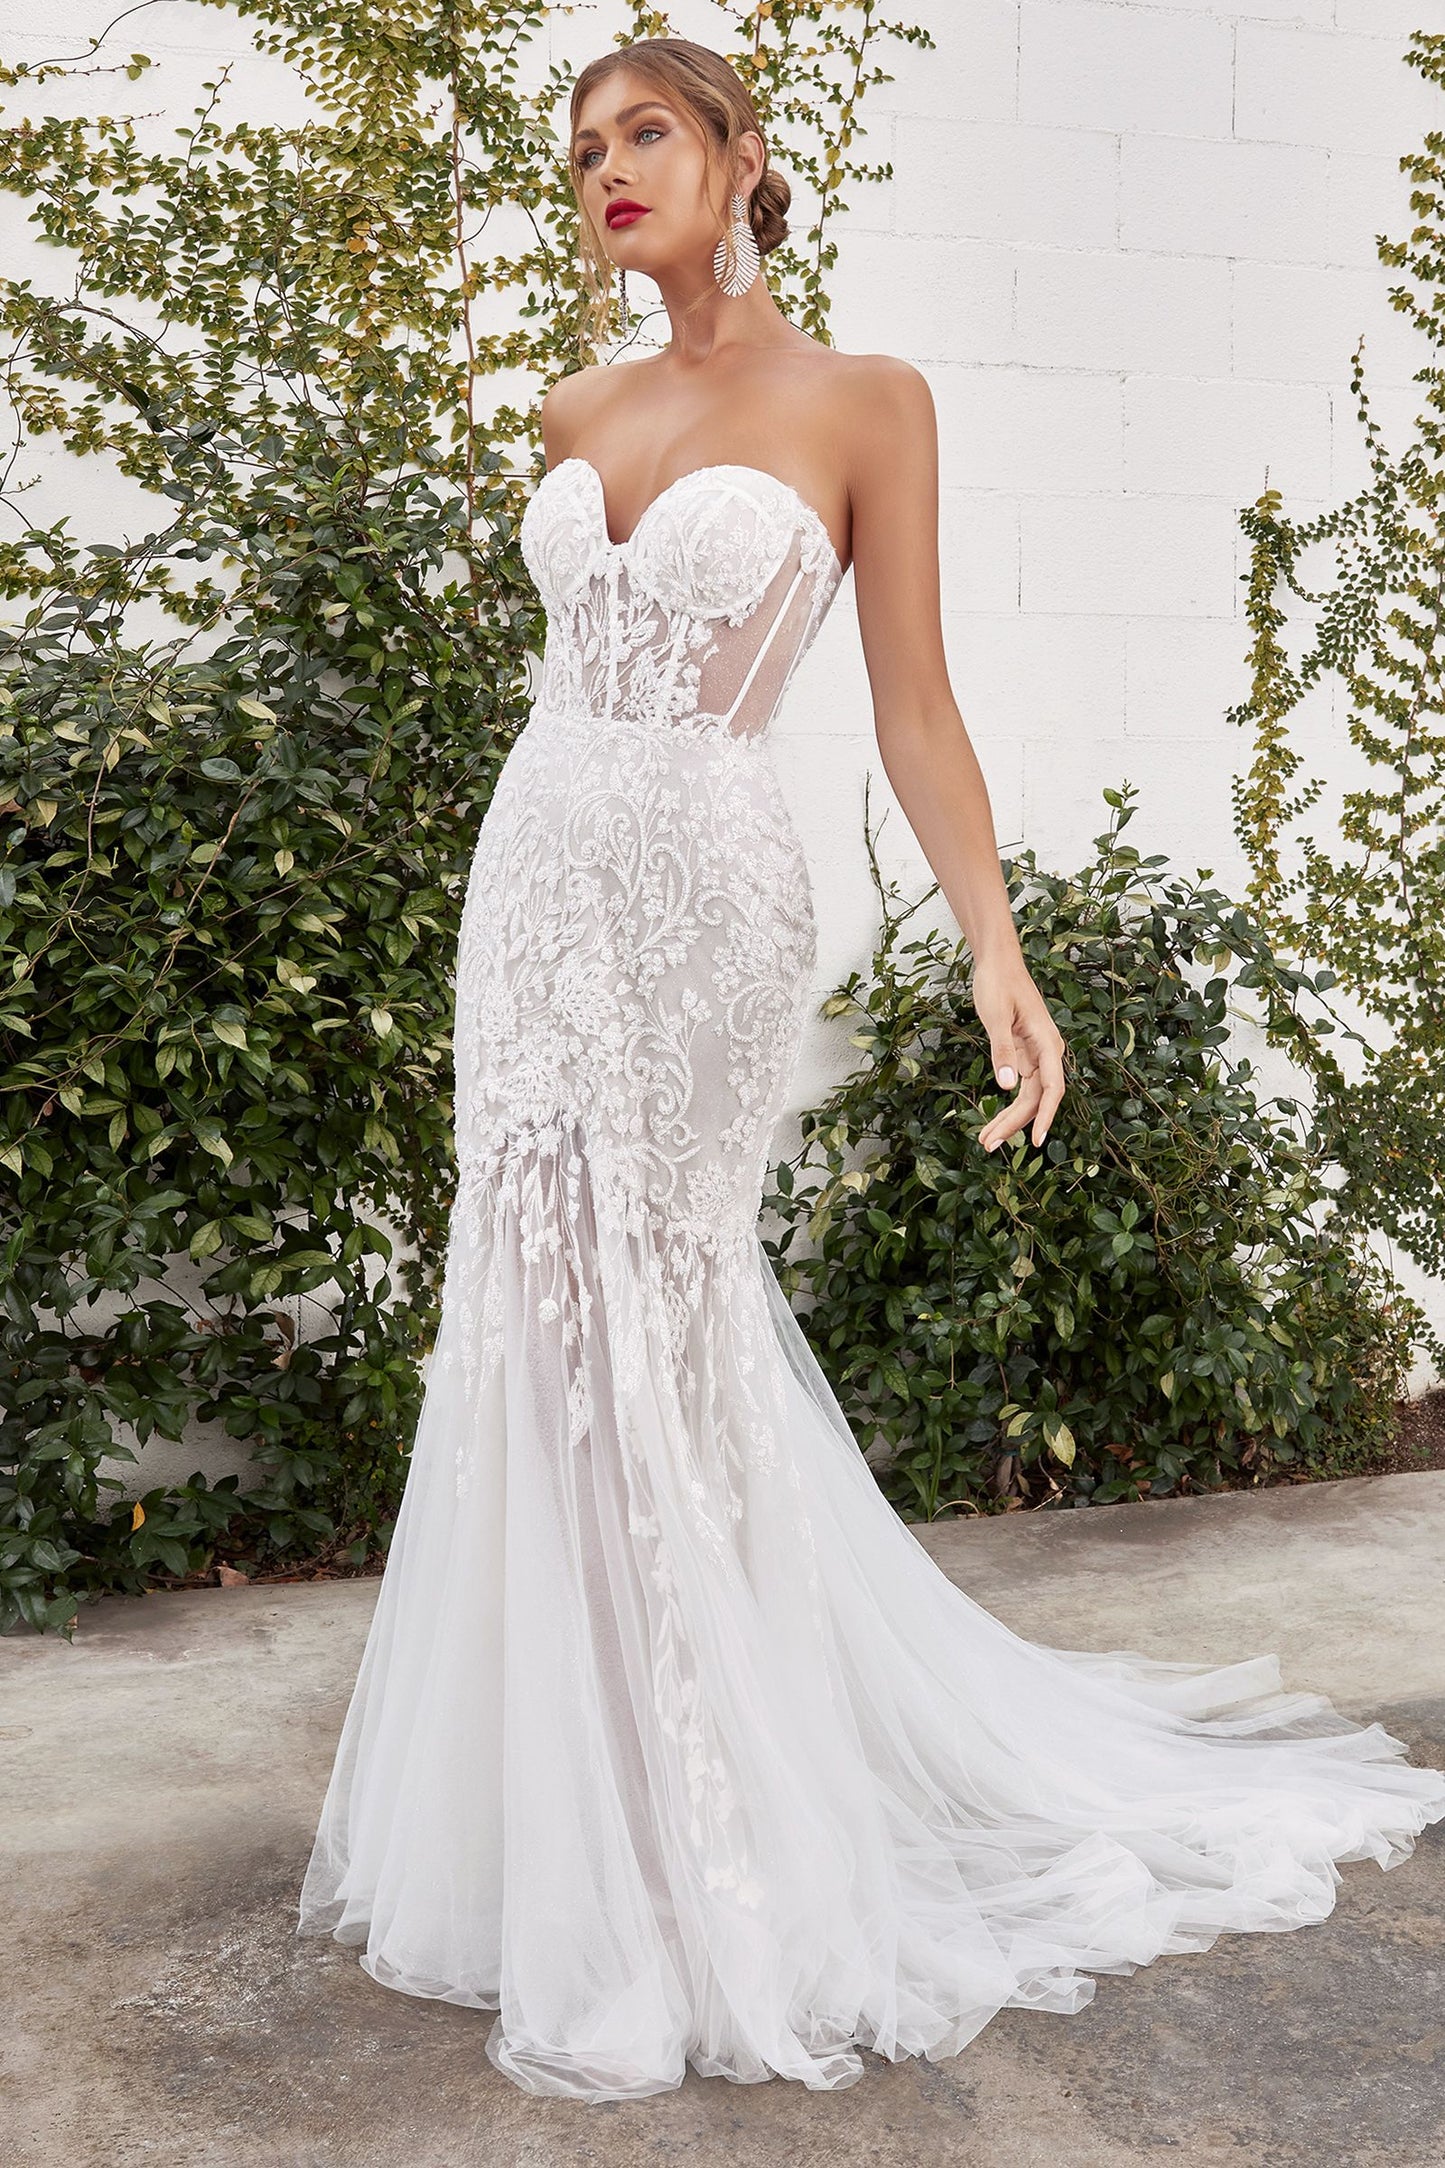 Andrea Leo - Sereia Mermaid Off the Shoulder Wedding Gown  Style #A1068